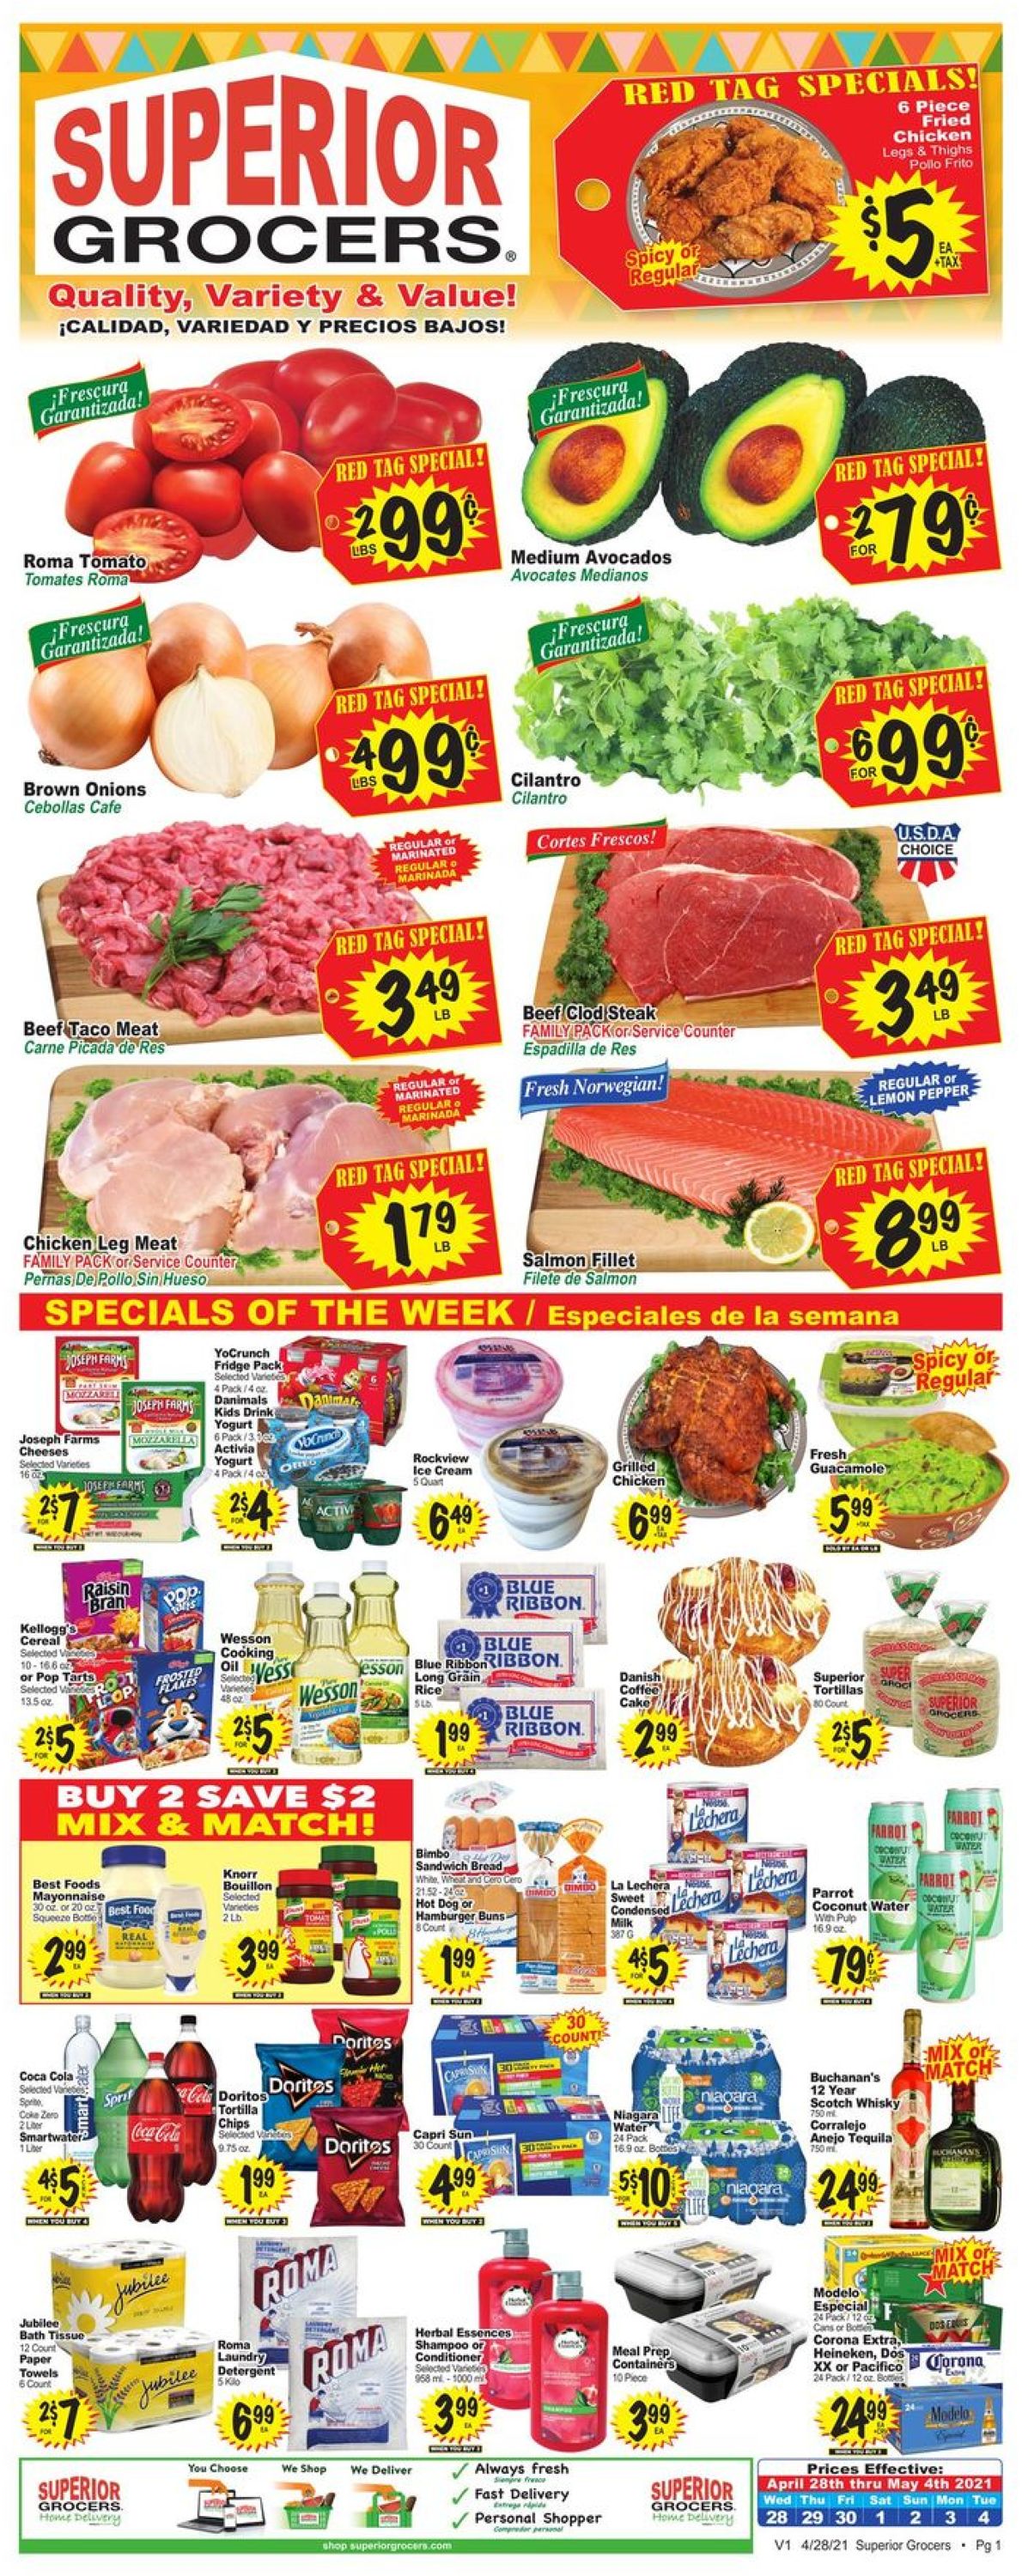 Superior Grocers Current weekly ad 04/28 - 05/04/2021 - frequent-ads.com